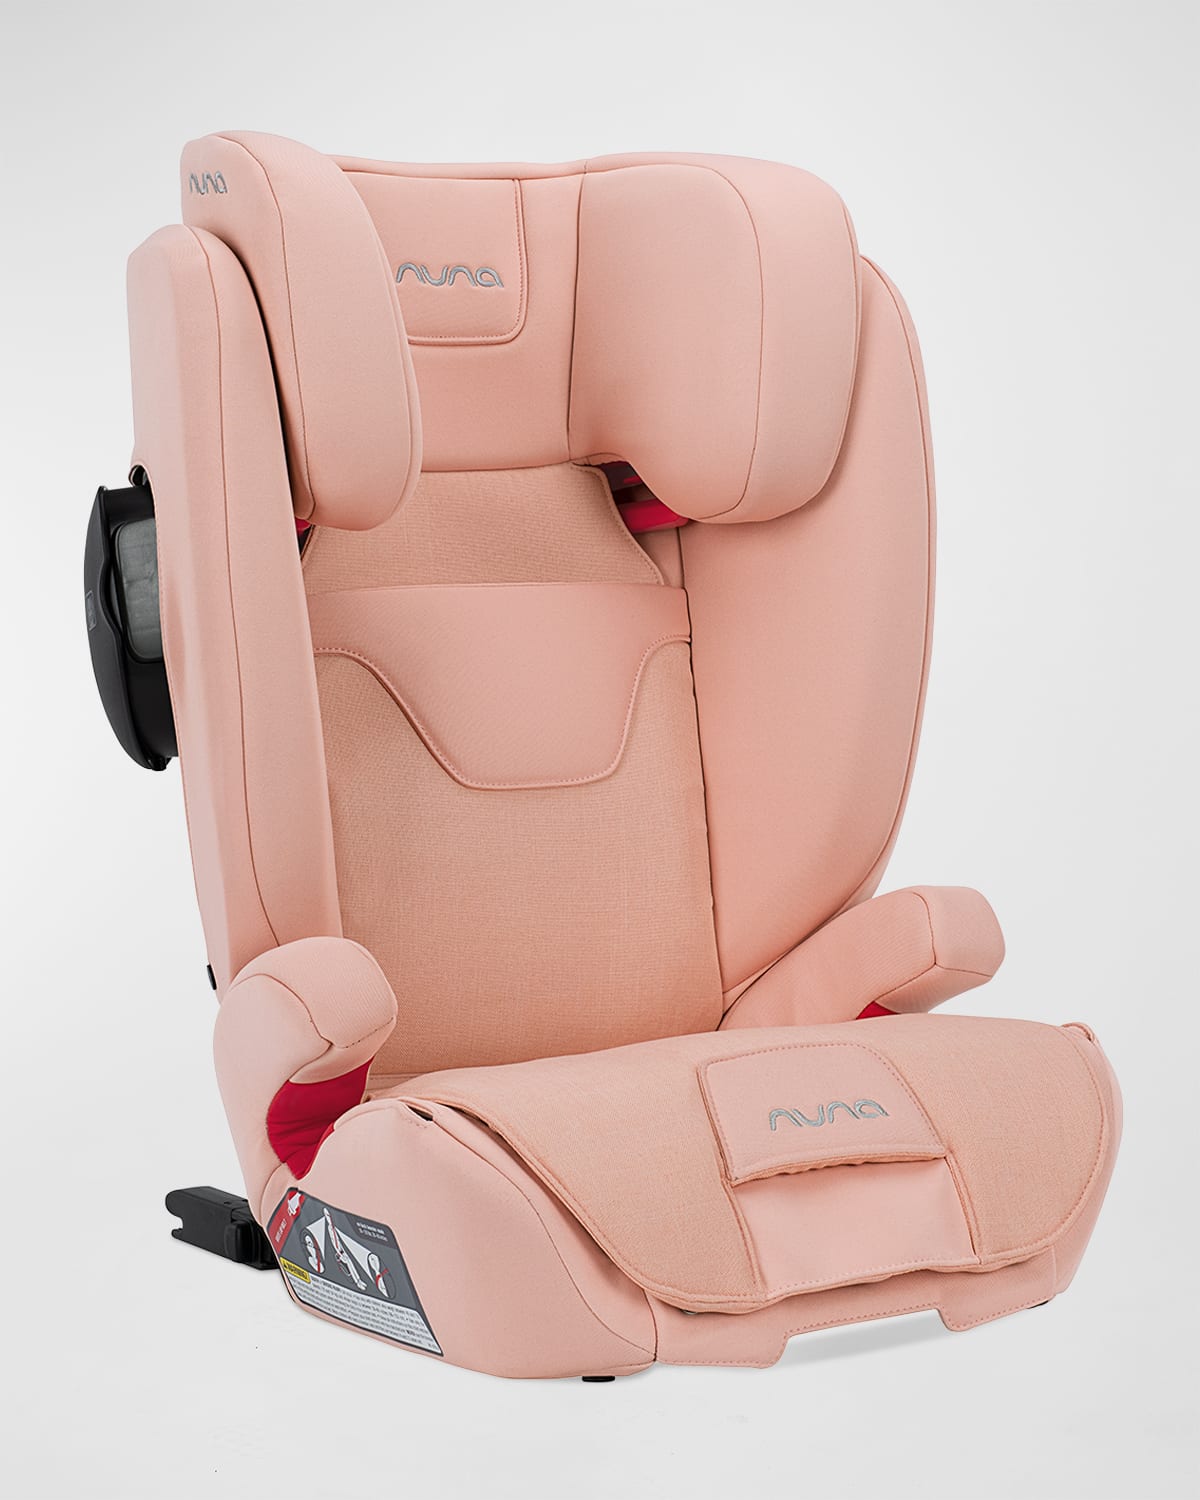 Nuna Aace Booster Seat In Coral